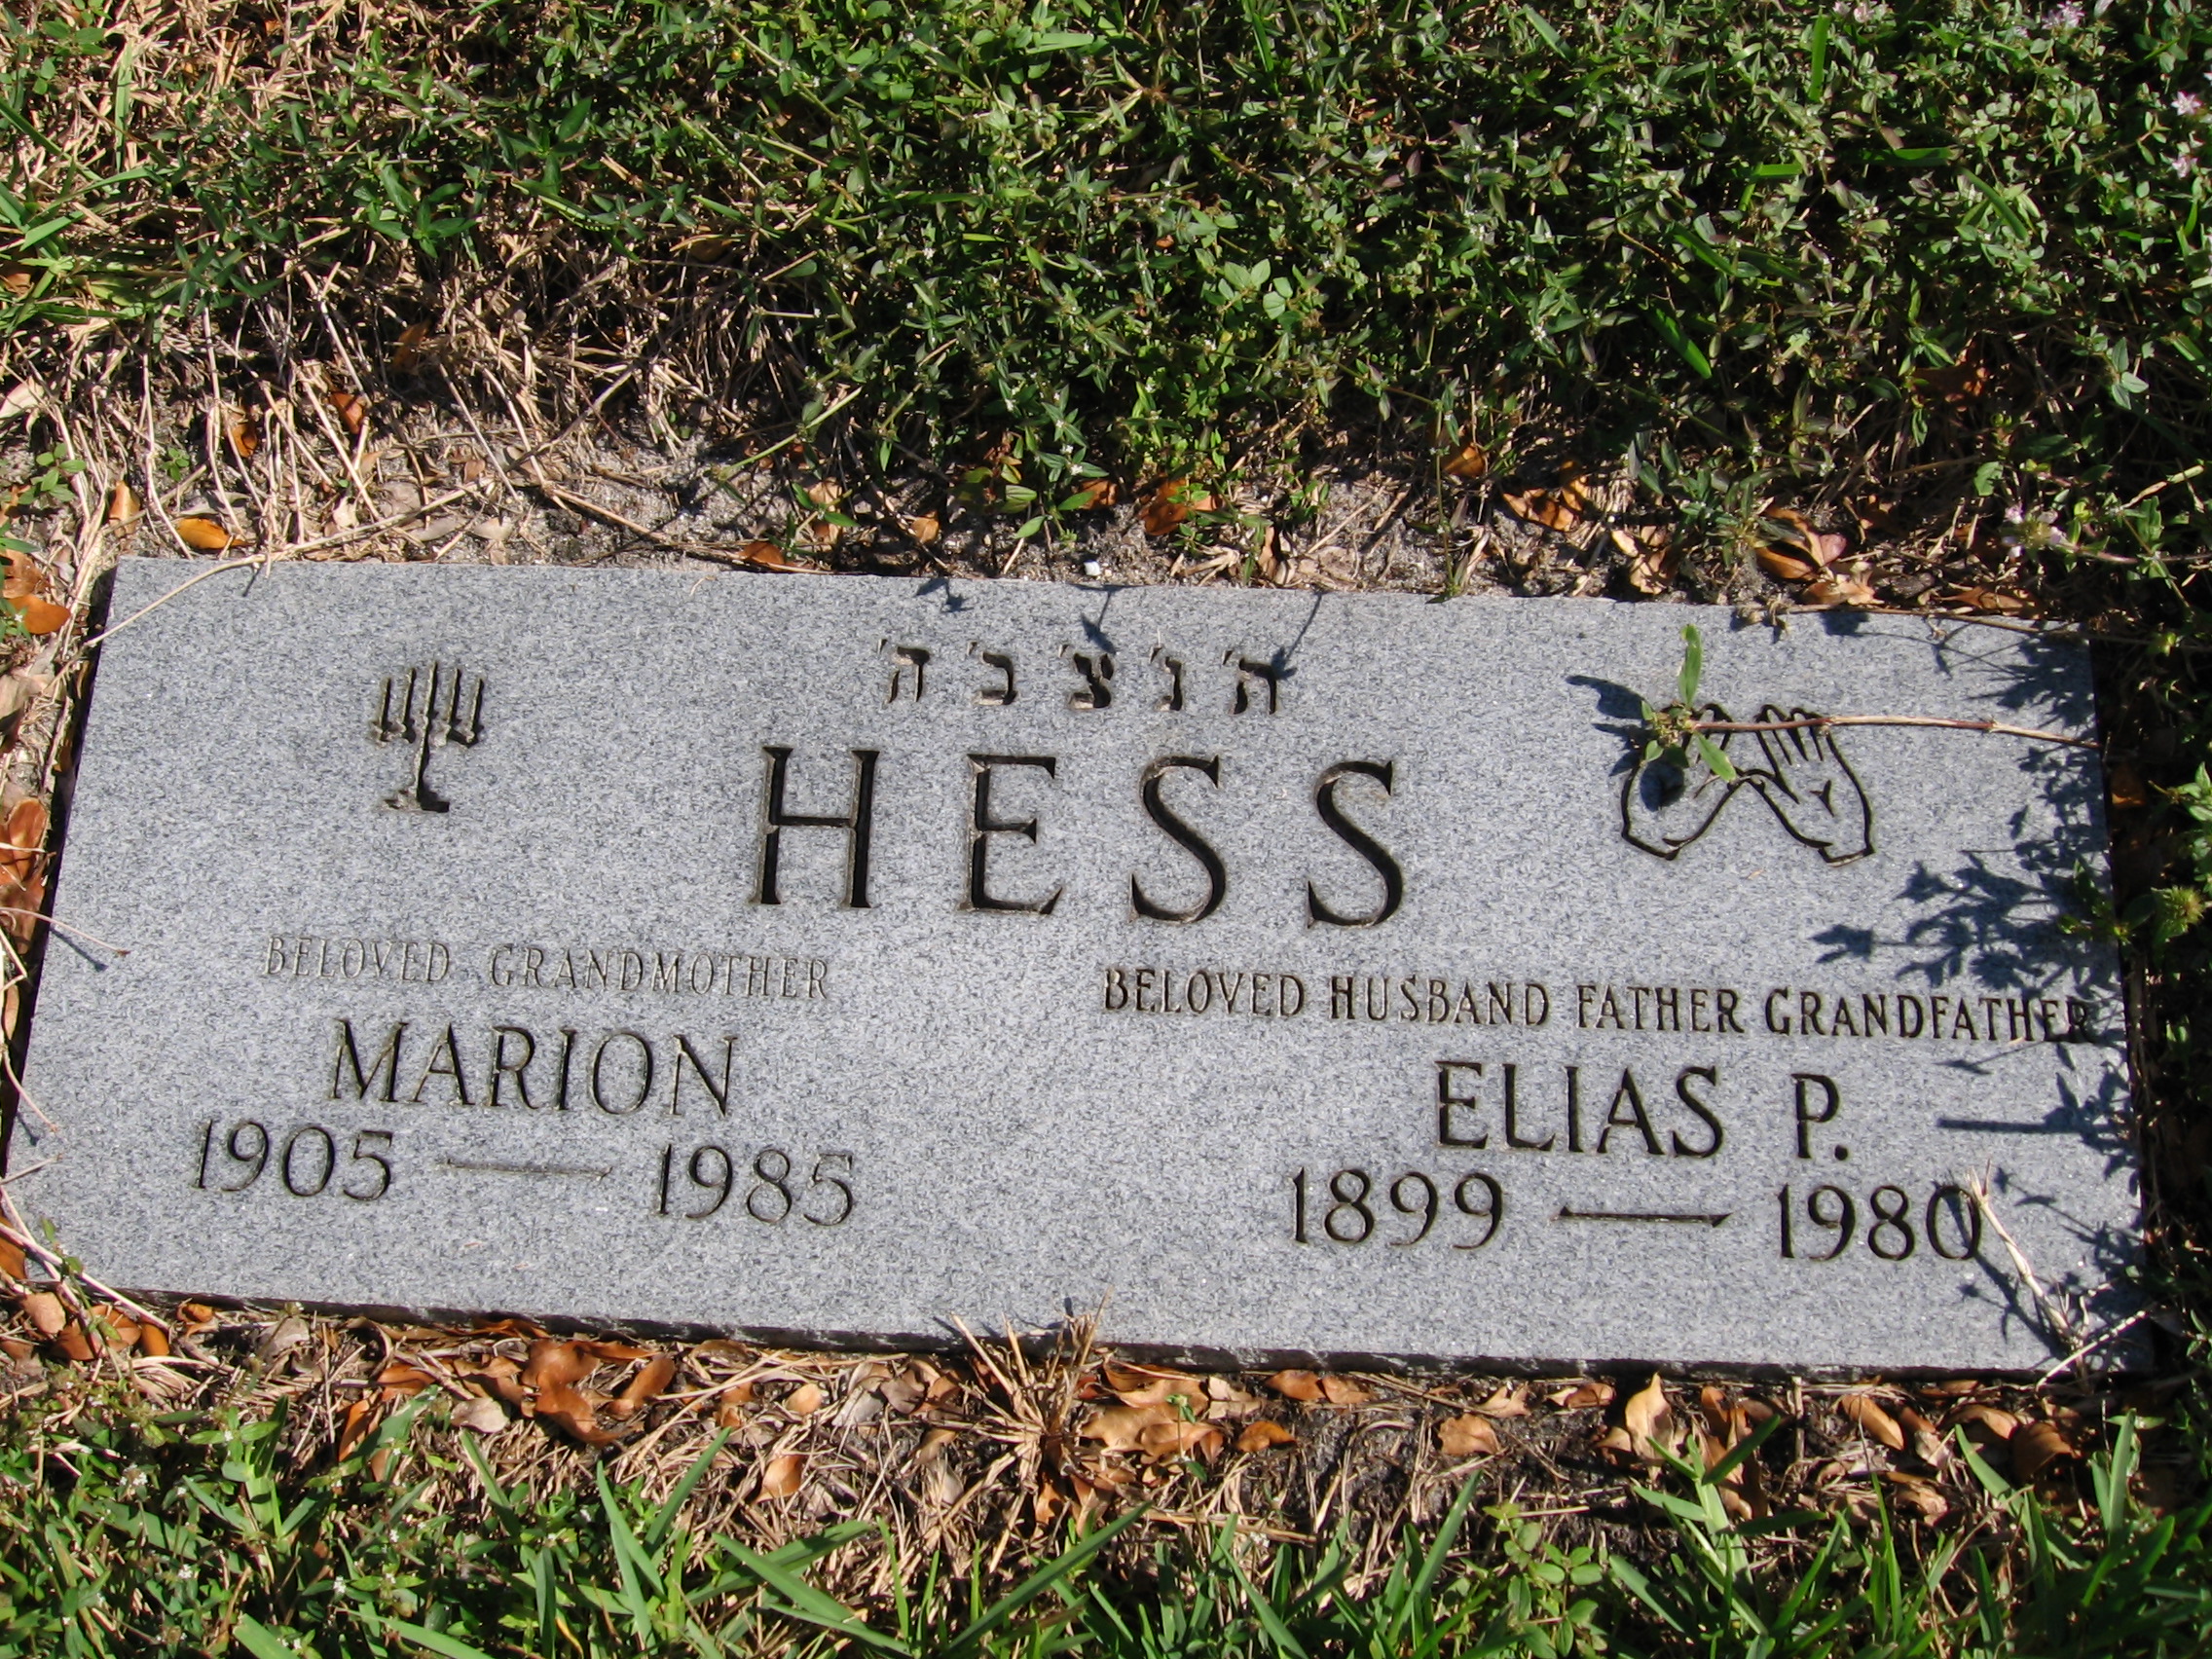 Marion Hess